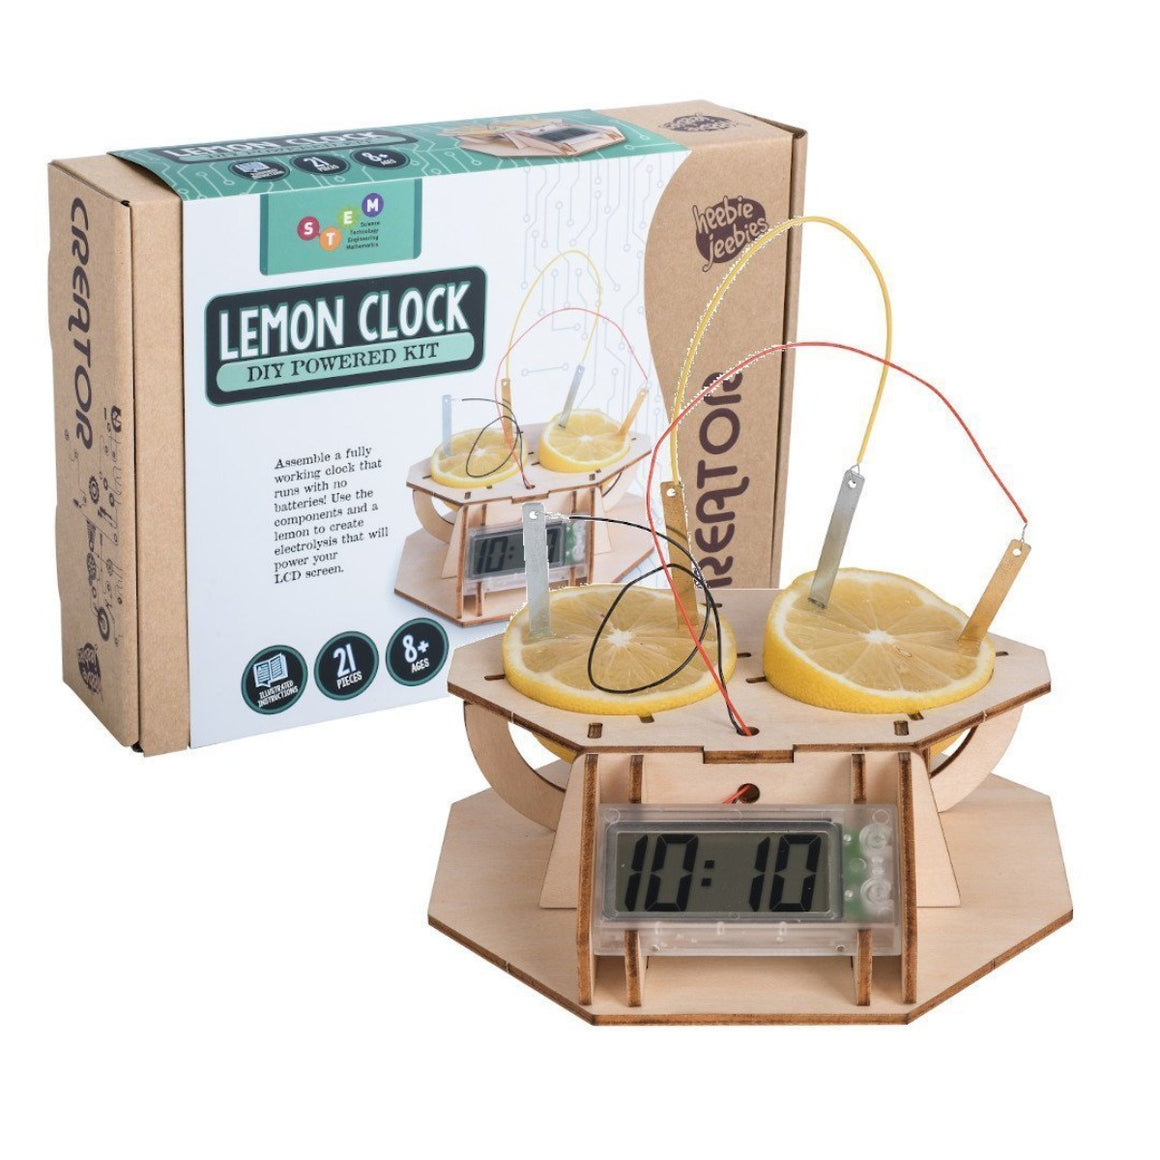 Image featuring the fully build timber lemon clock in the foreground with it's box packaging behind it